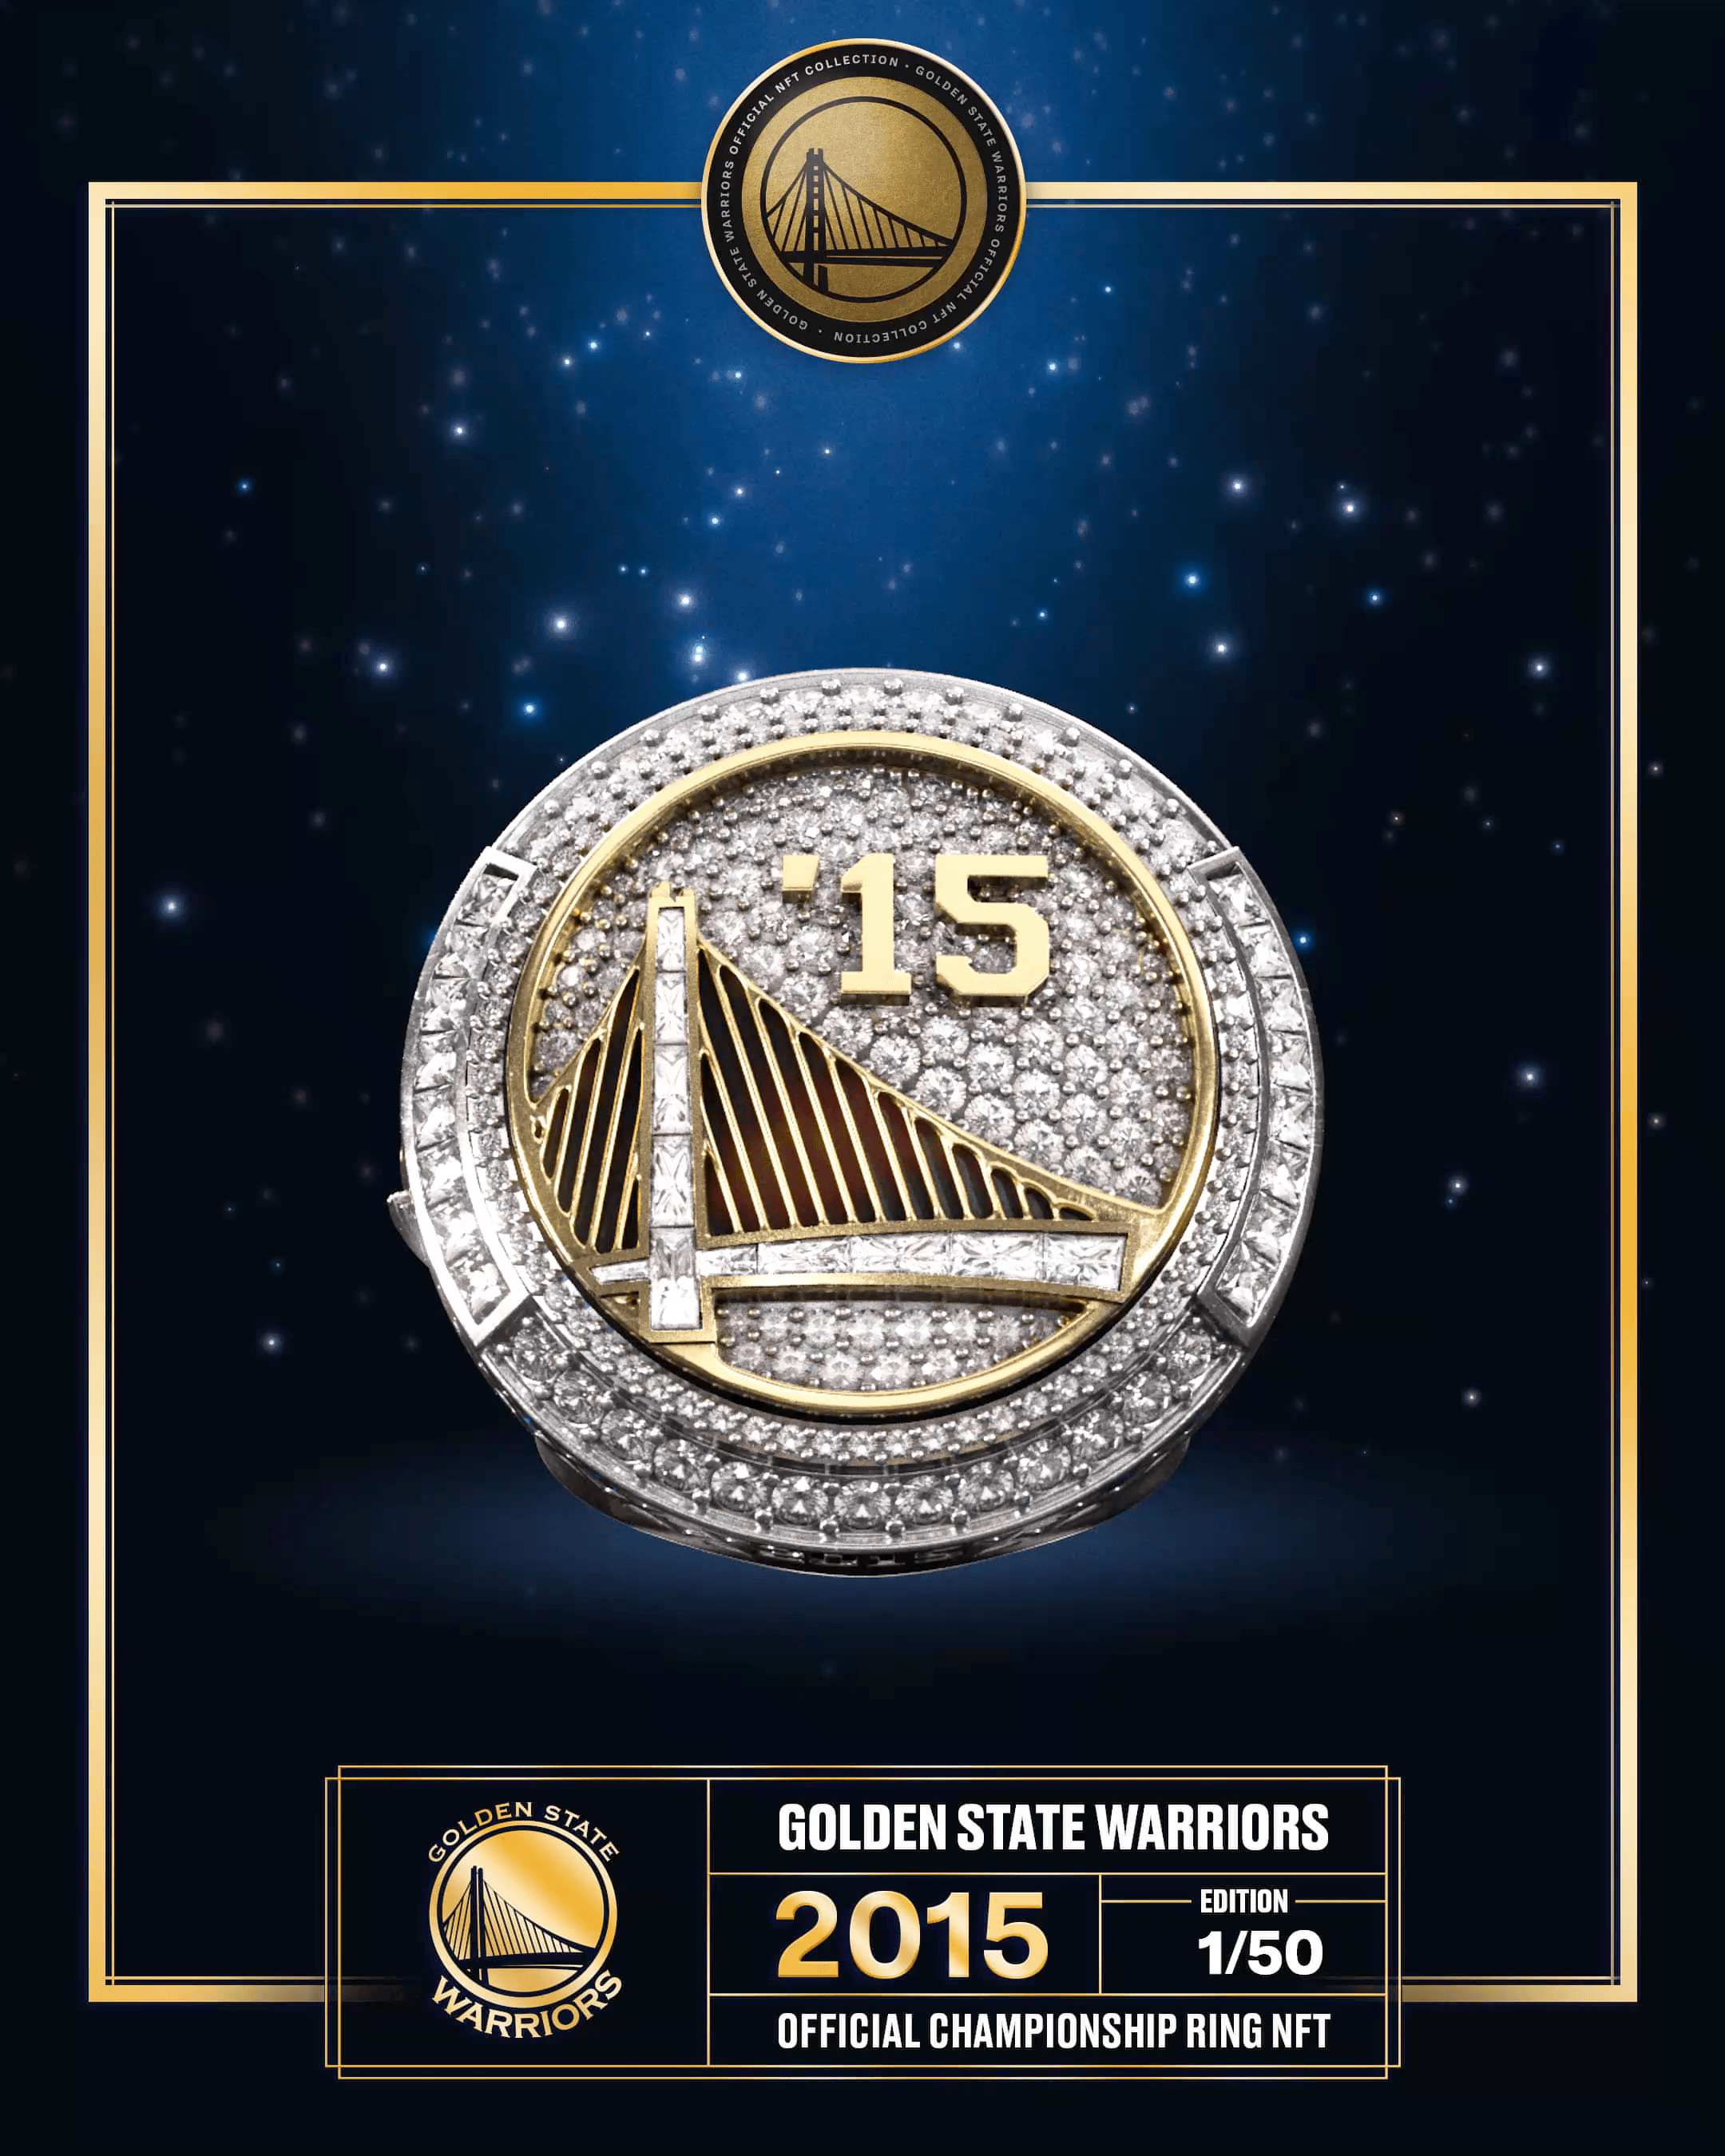 Edition 1 - 2015 Warriors Championship Ring NFT & Physical Ring (1/50)